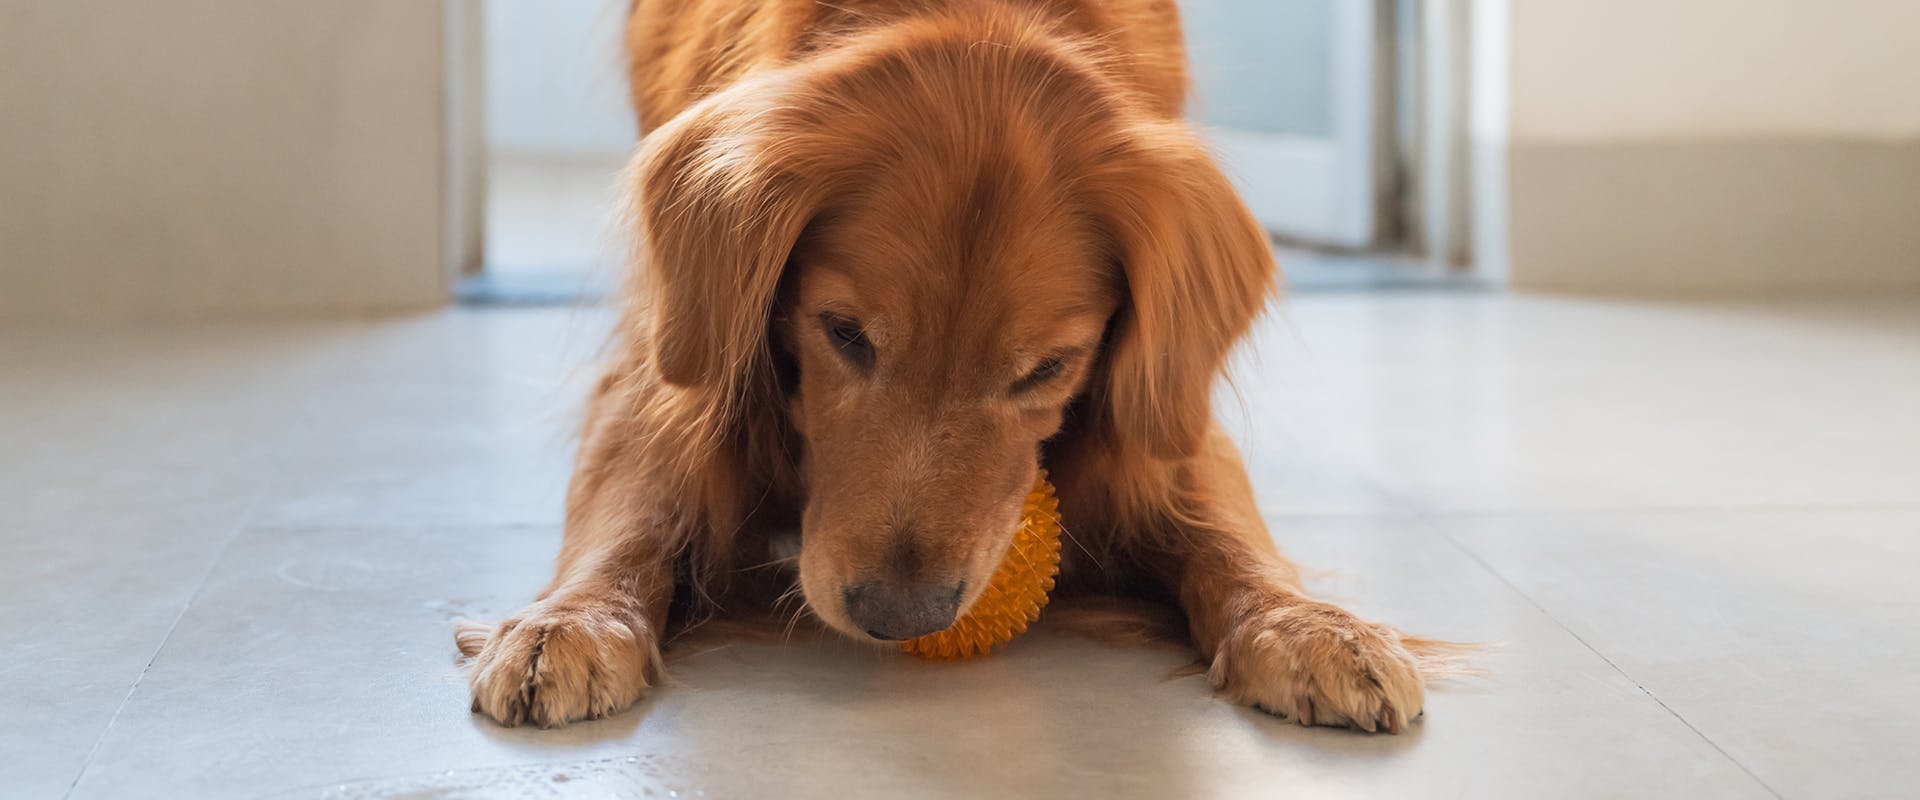 A red Golden Retriever dog chewing on an orange ball